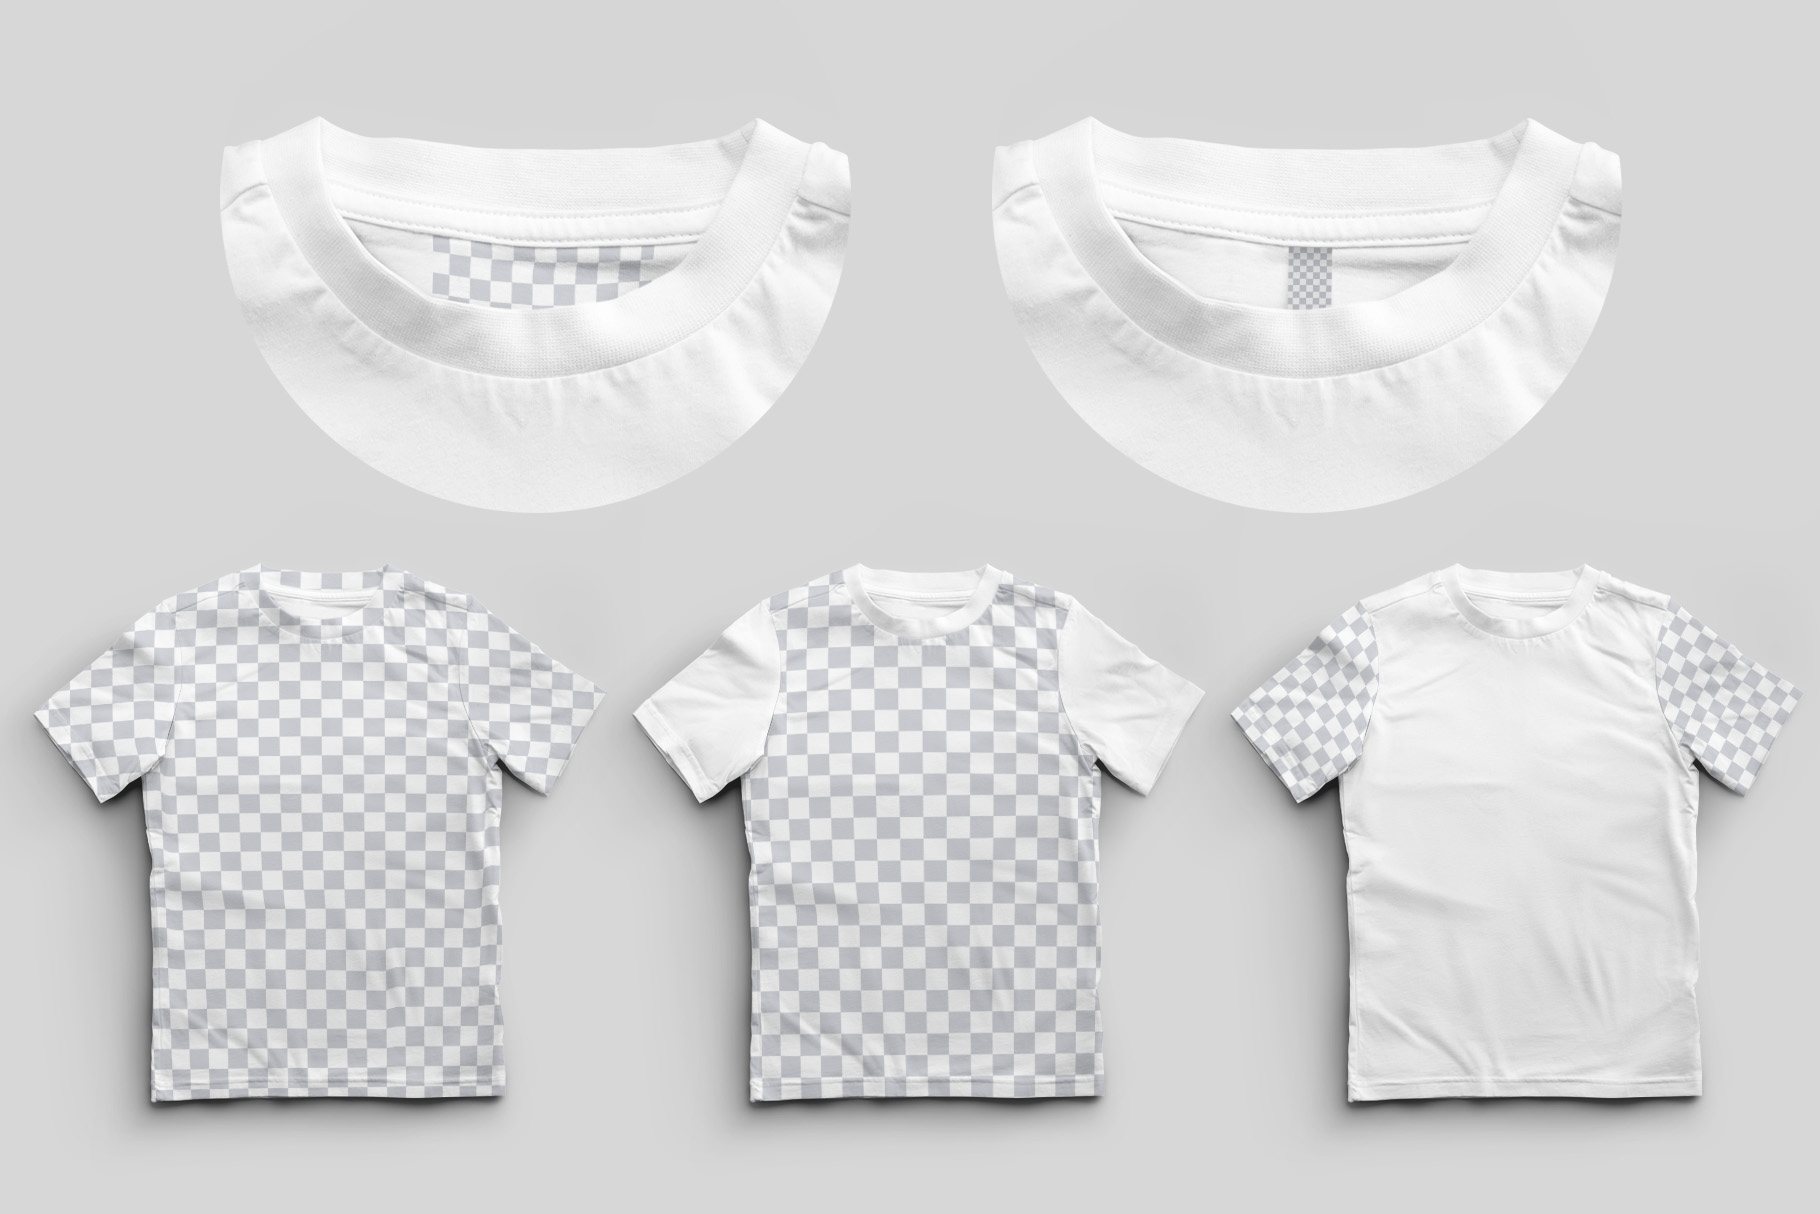 Louis Vuitton logo T-shirt mockup in white colors. Mockup of realistic